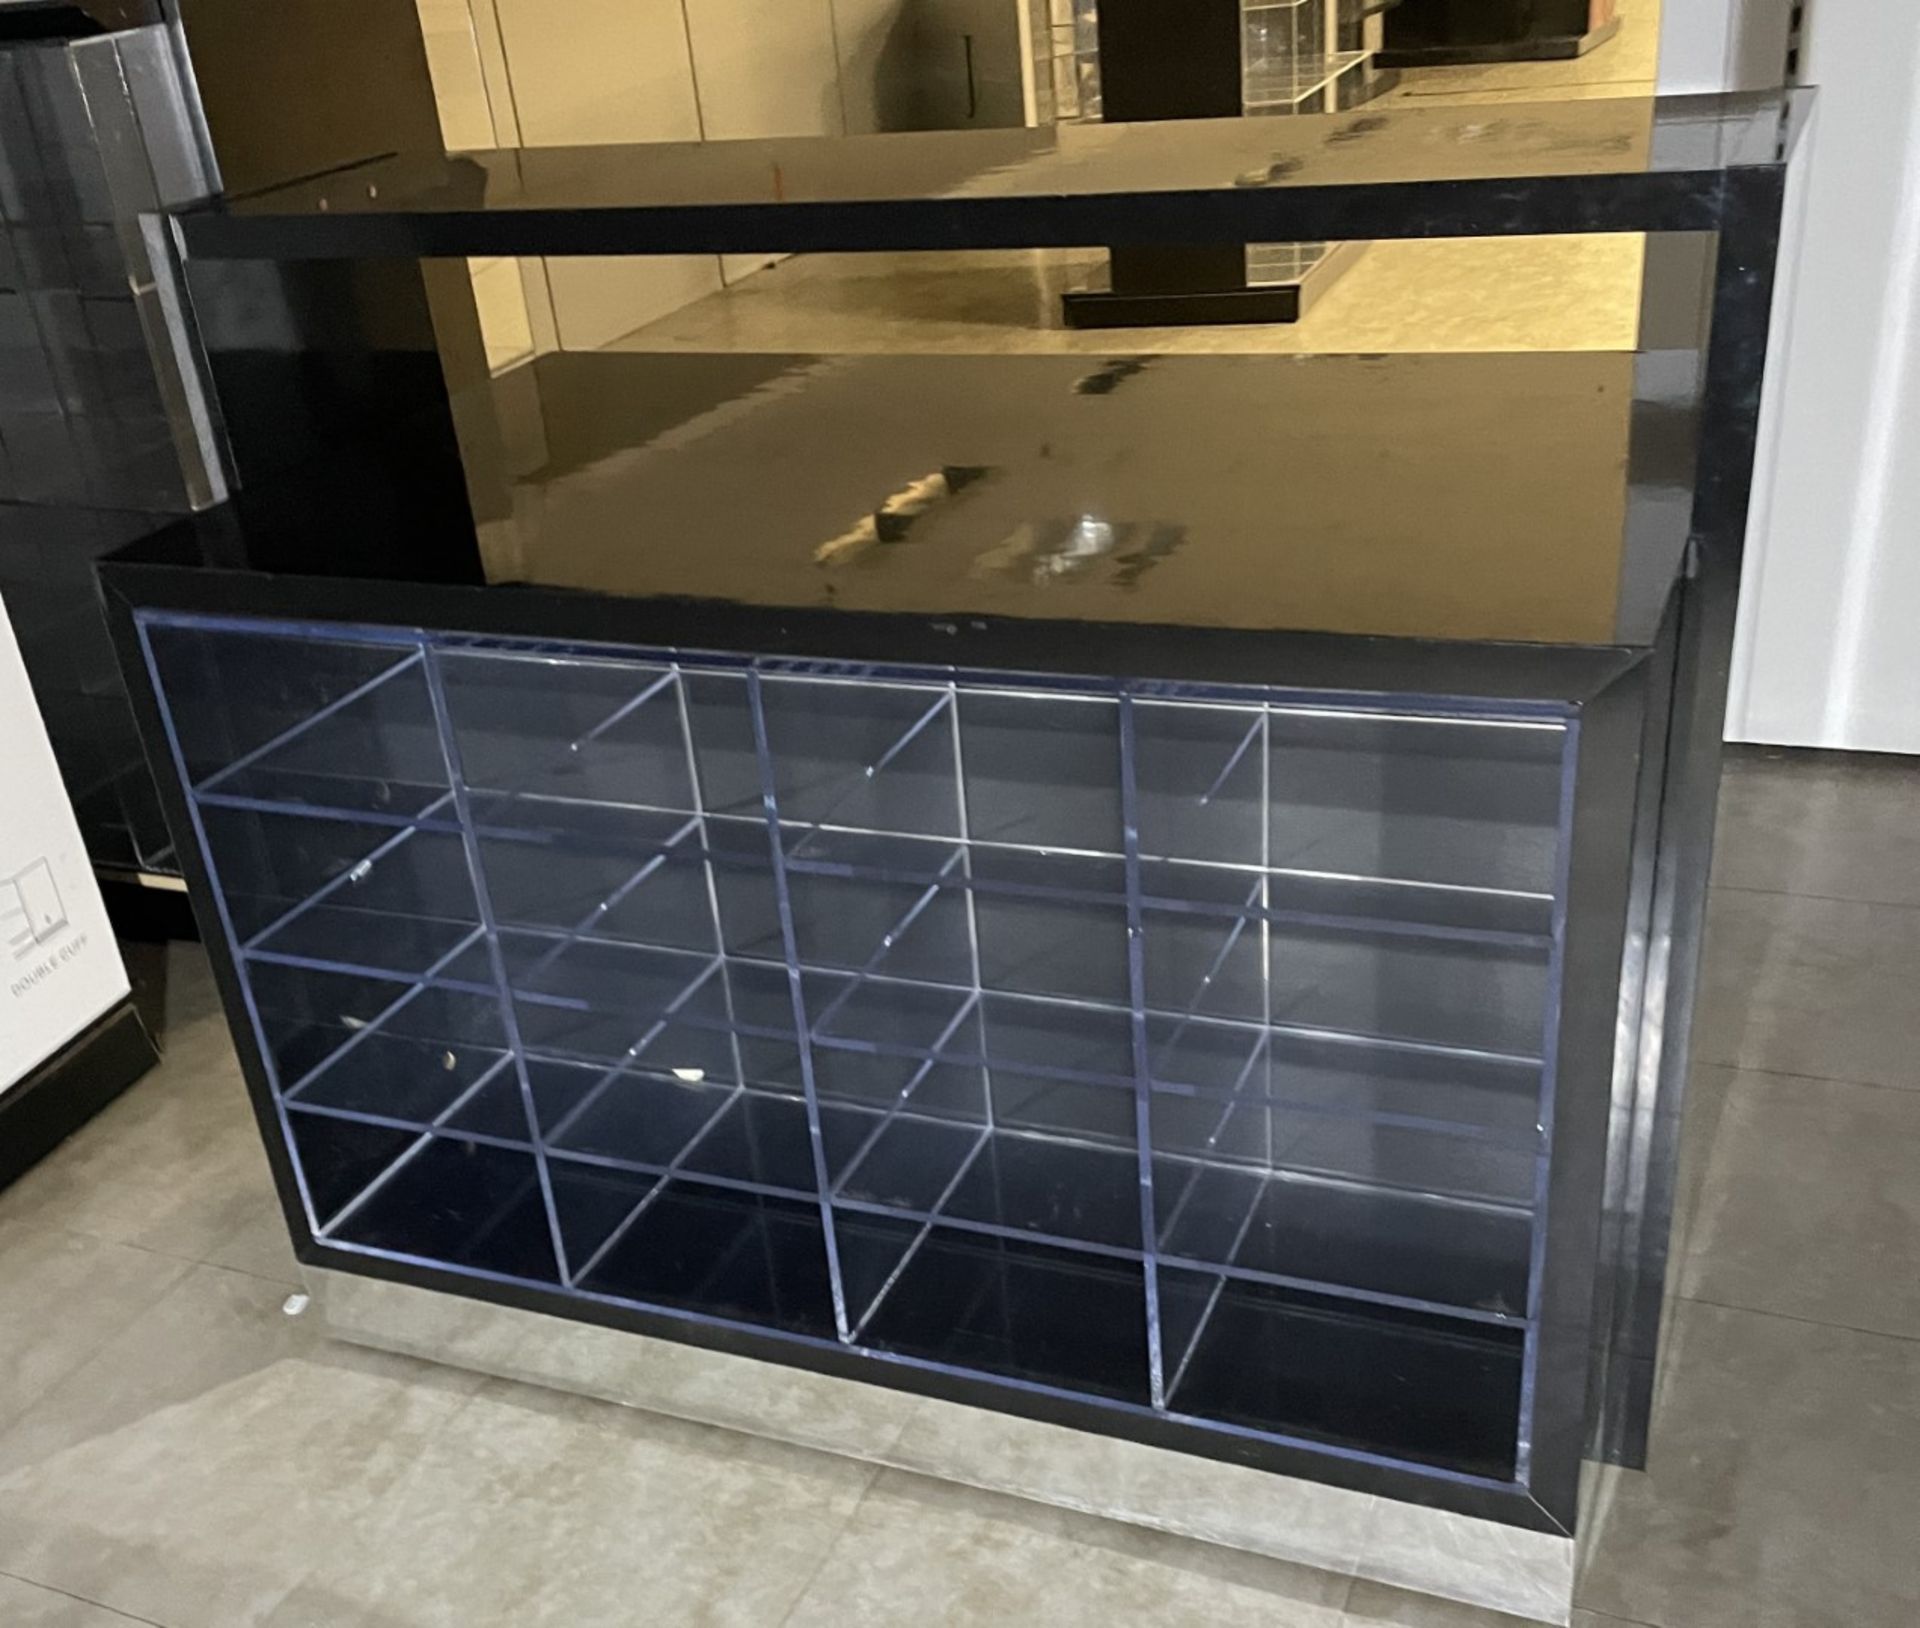 1 x Double Sided Retail Shirt Display Stand With Acrylic Shelves and Black Gloss Over Shelf For - Image 6 of 9